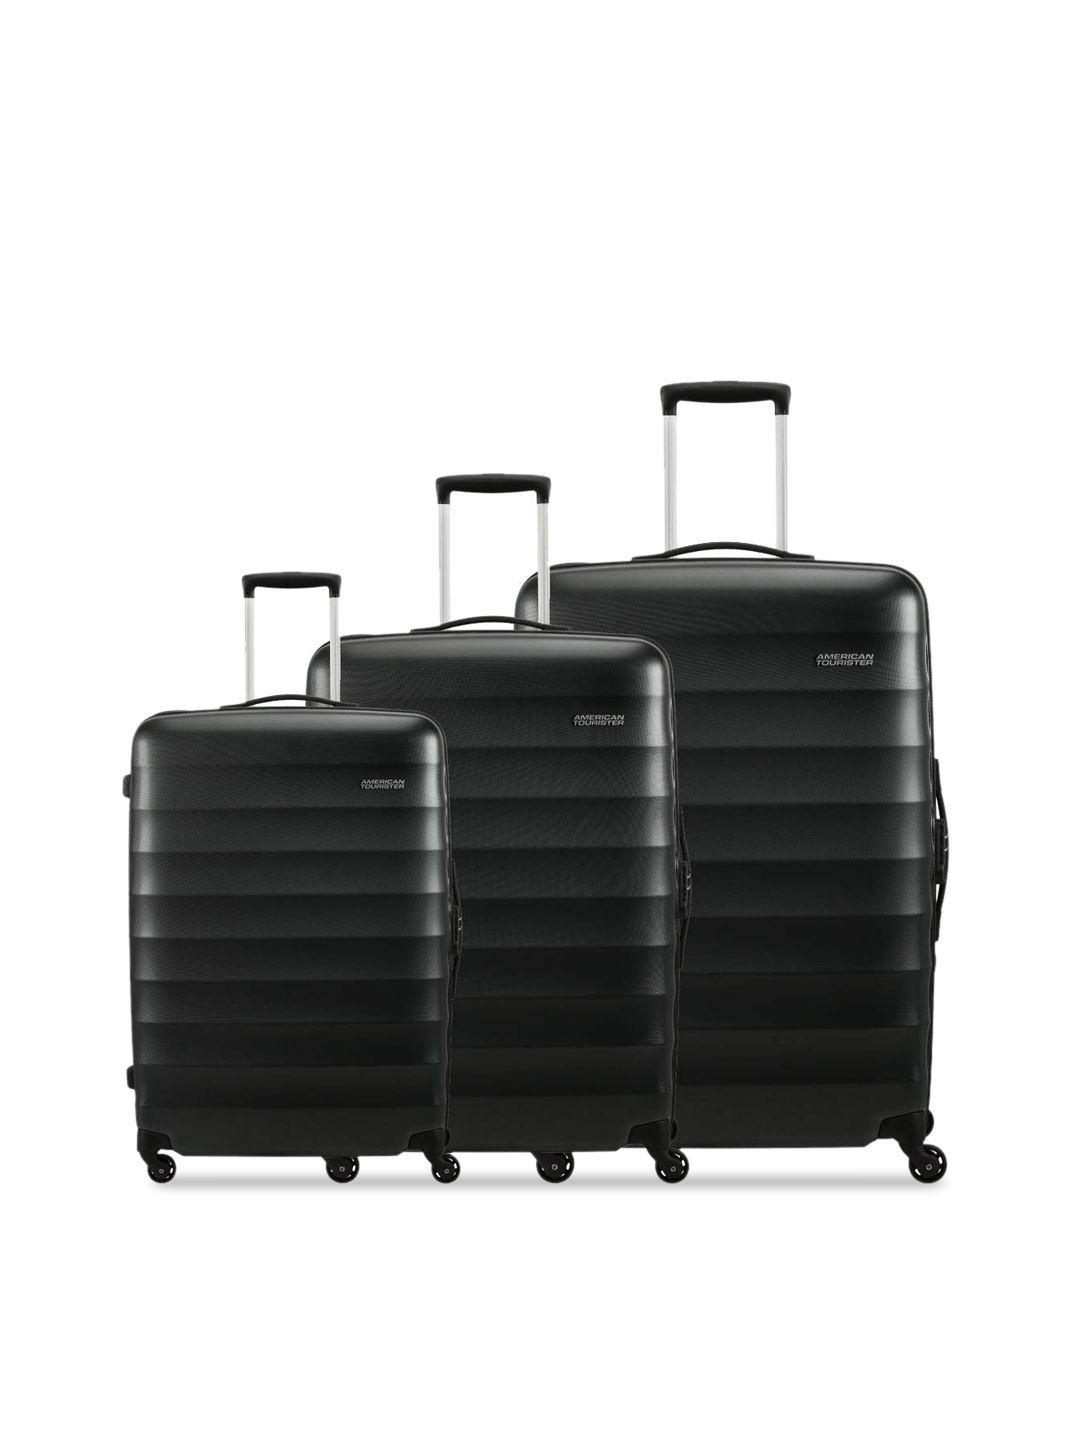 american-tourister-set-of-3-black-solid-hard-sided-trolley-suitcases